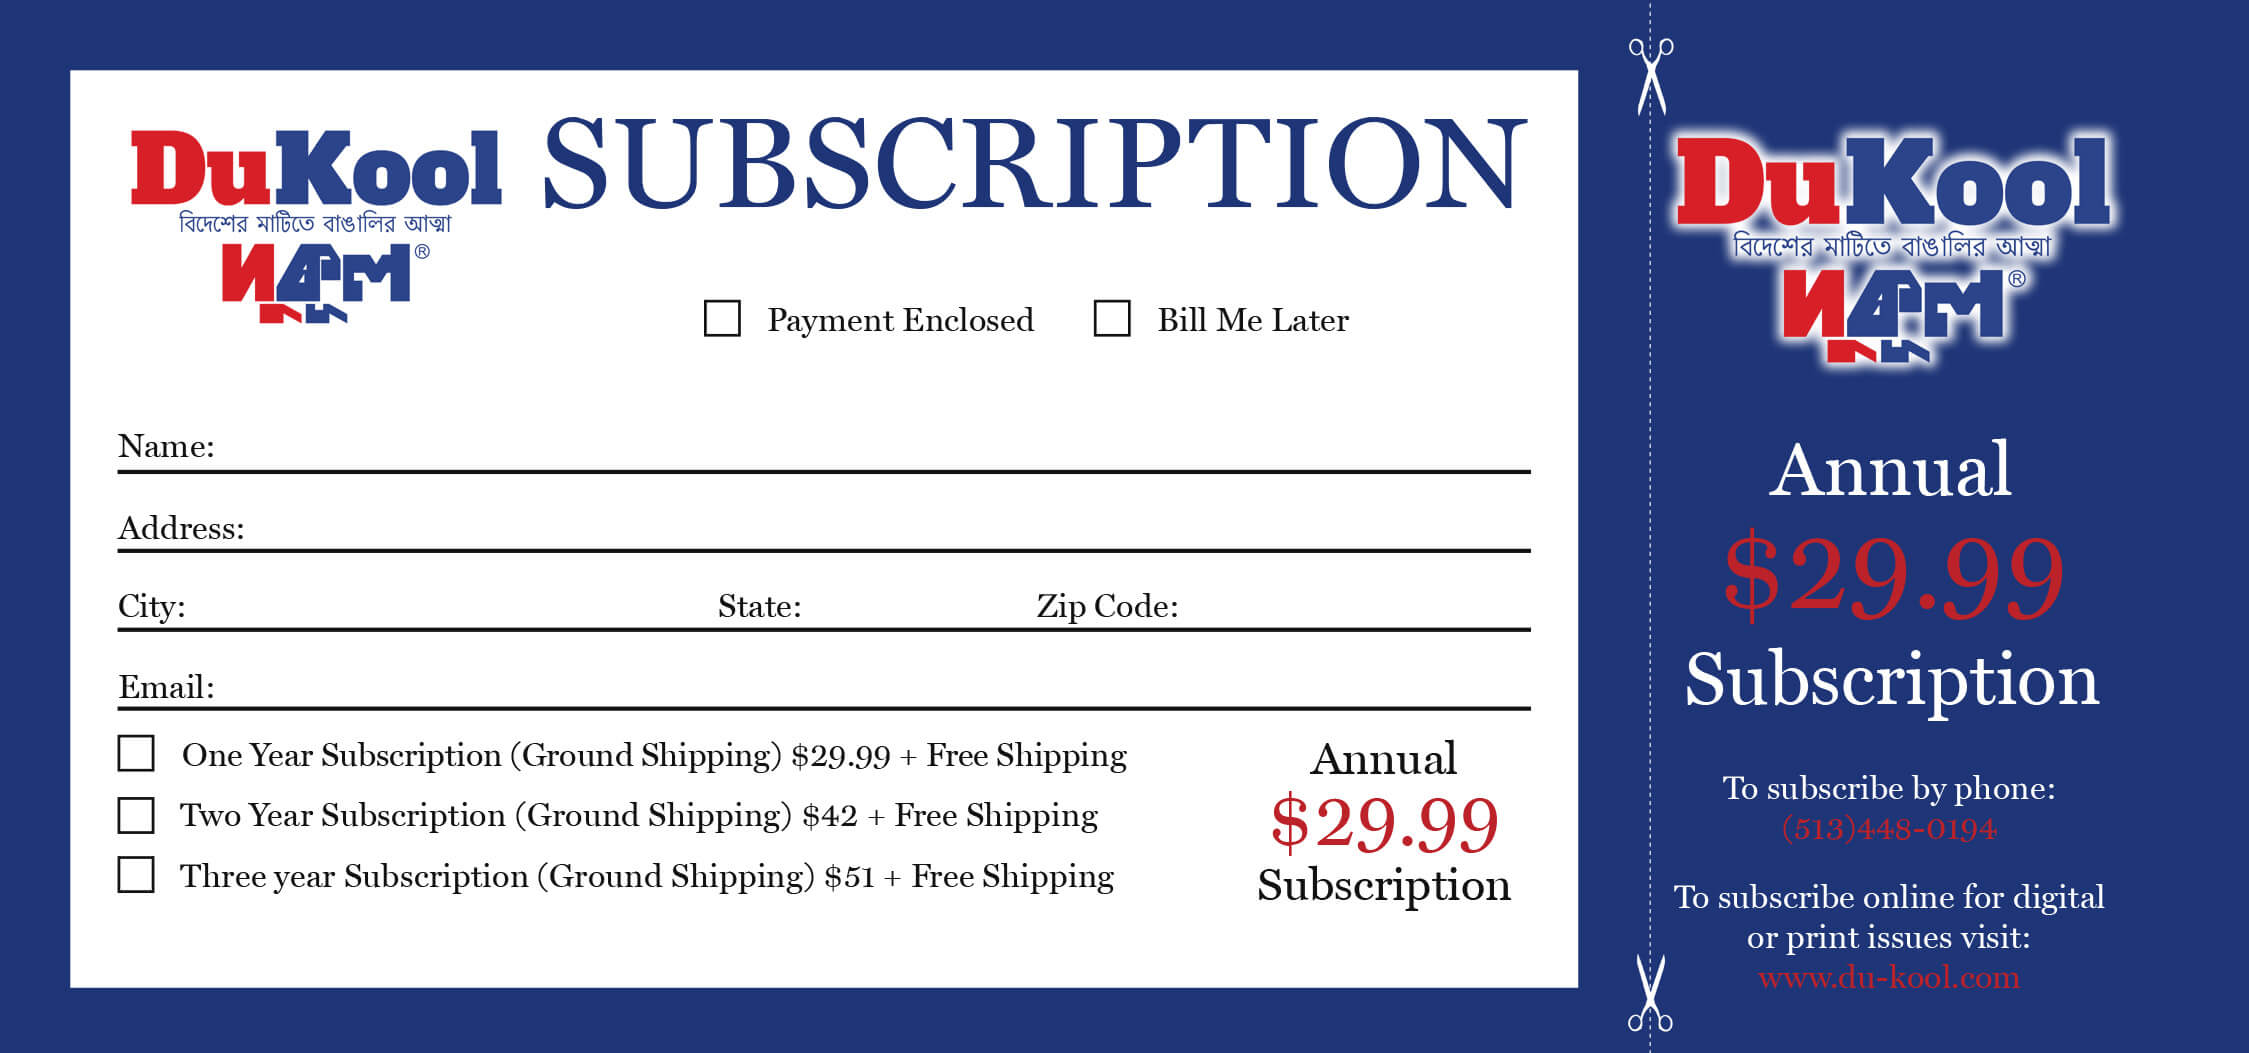 Magazine Subscription Card Template ] – How To Integrate Throughout Magazine Subscription Gift Certificate Template